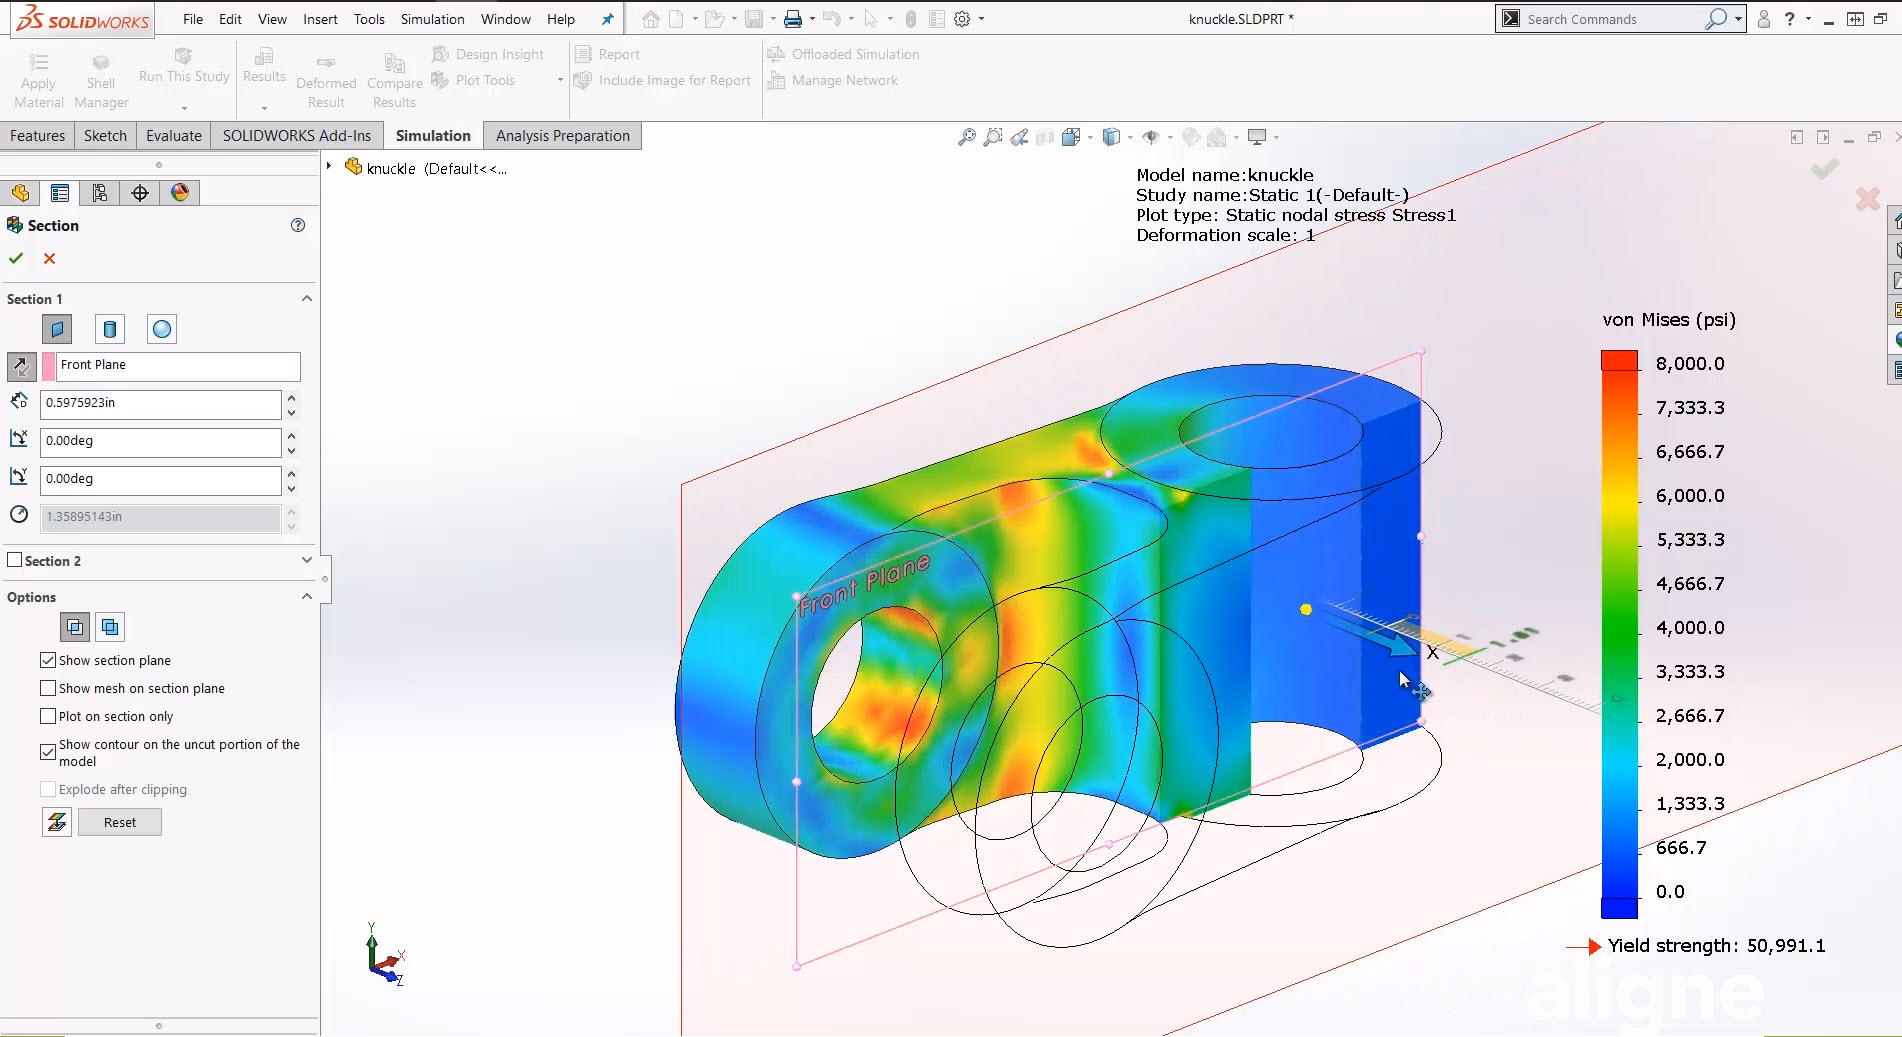 engineering analysis with solidworks simulation 2019 pdf free download